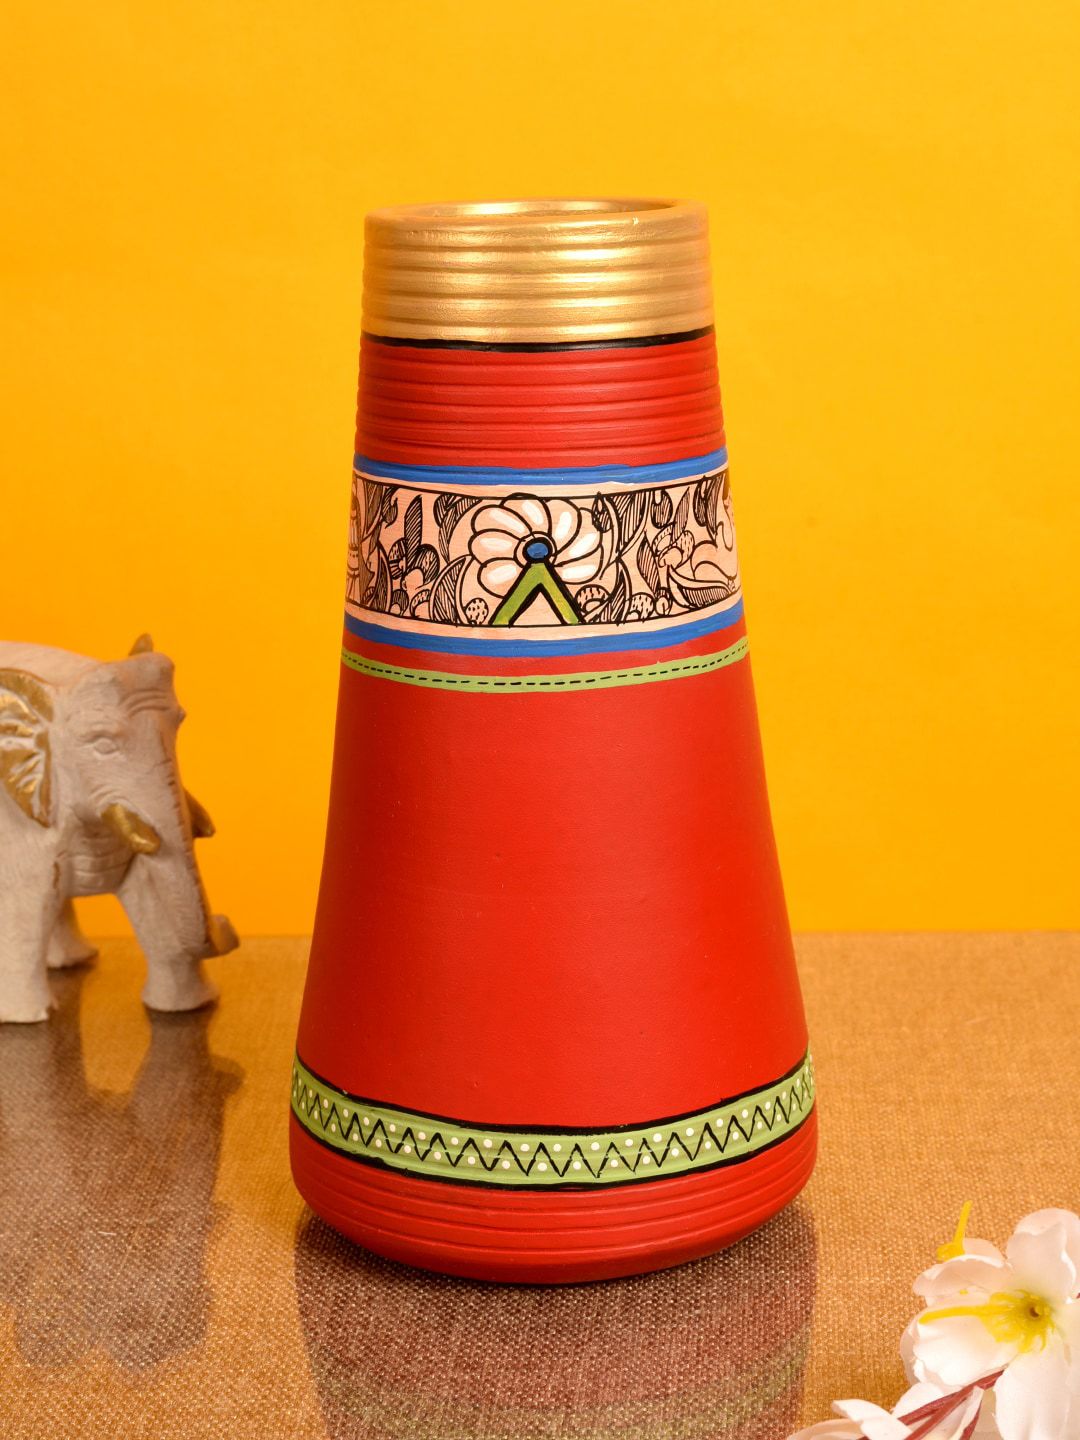 AAKRITI ART CREATIONS Red & Blue Madhubani Handcrafted Earthen Vase Price in India